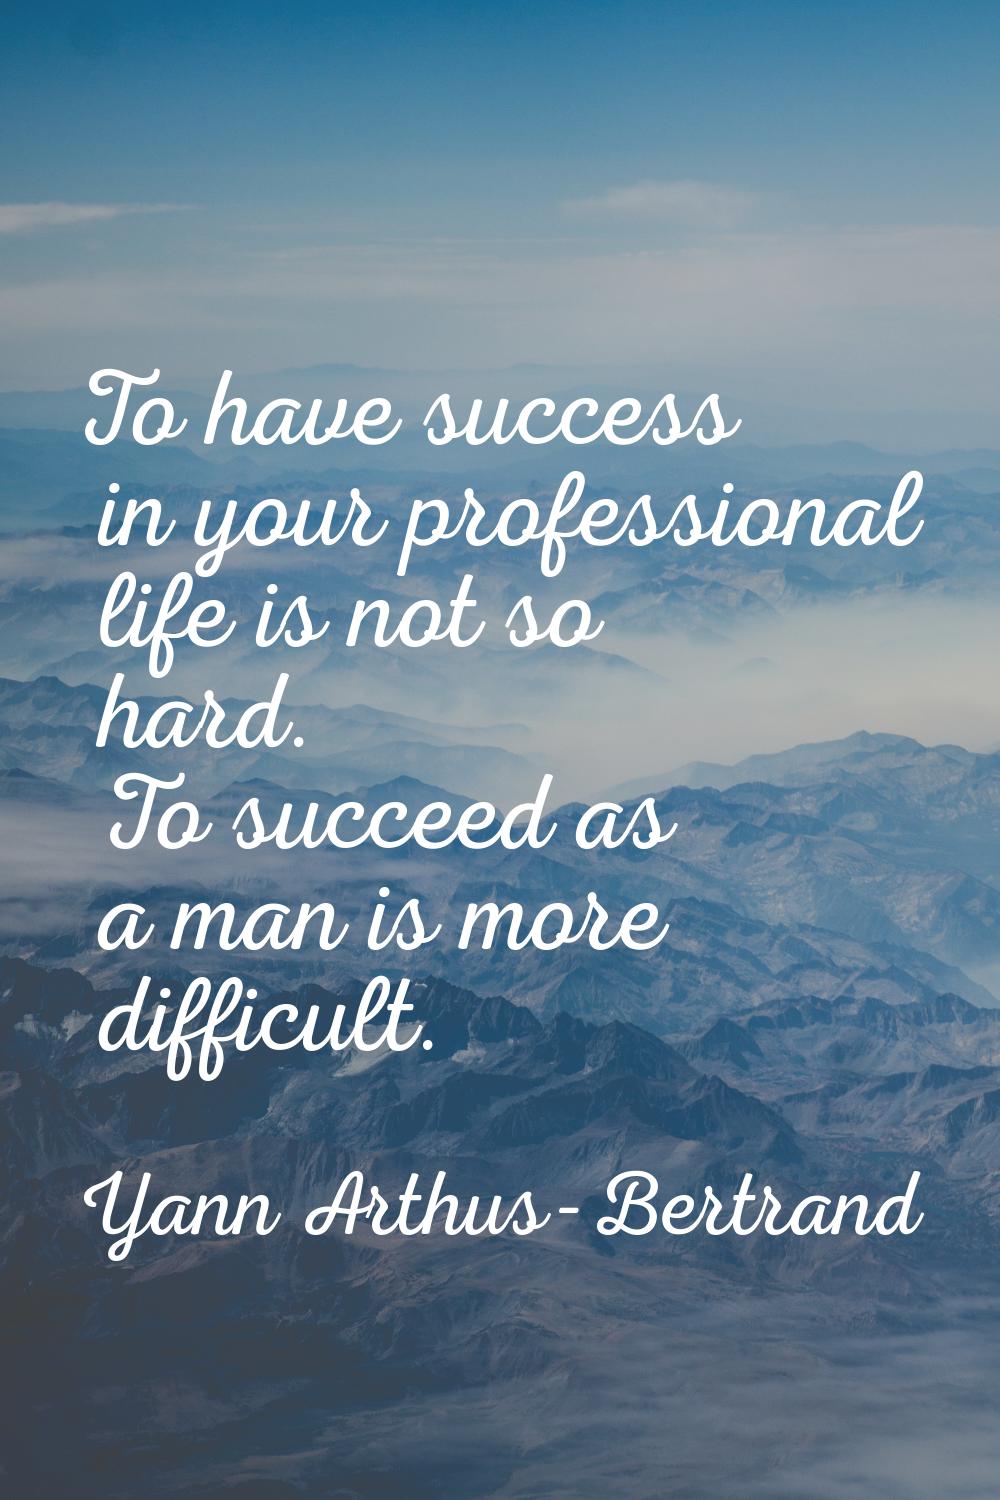 To have success in your professional life is not so hard. To succeed as a man is more difficult.